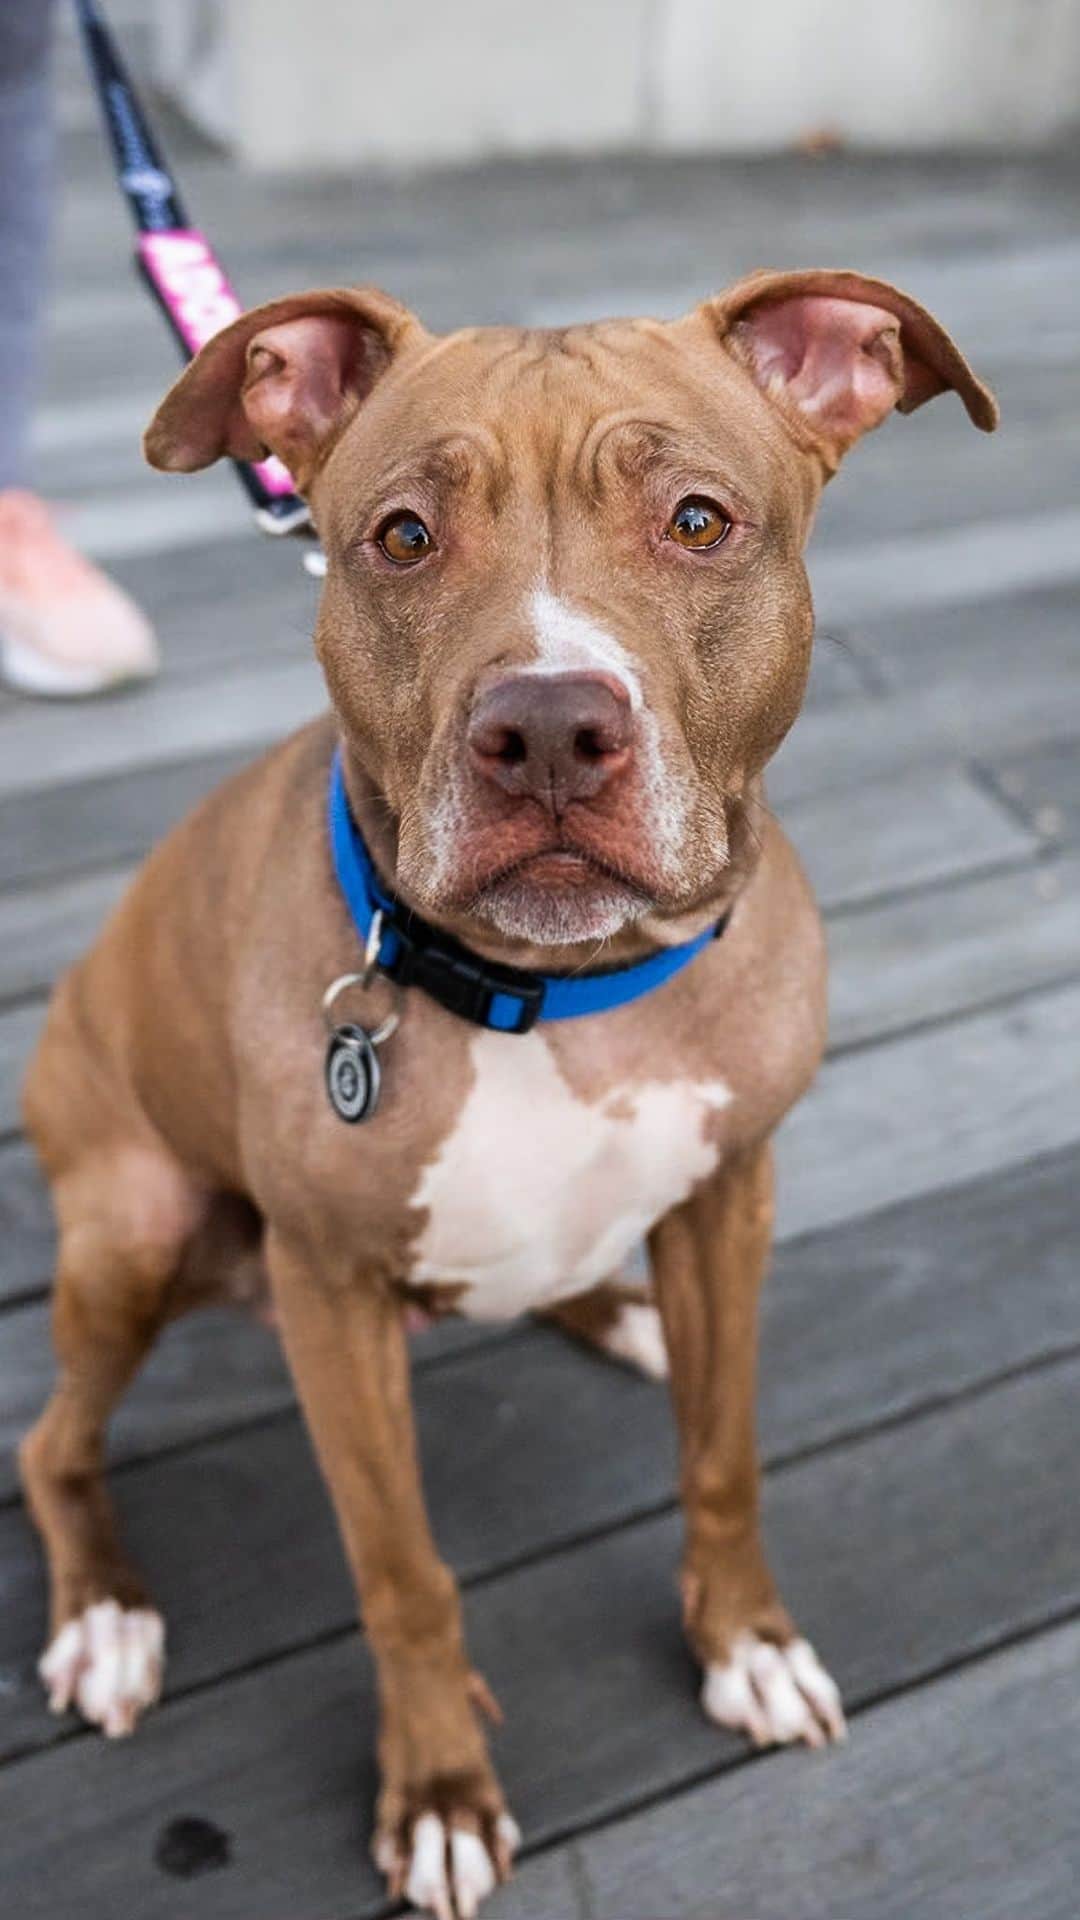 The Dogistのインスタグラム：「ADOPTABLE: Clarinet, Pit Bull mix (4 y/o), Gantry Plaza State Park, Queens, NY • “She’s really lovely. She’ll just cuddle up with you on the couch, and she loves being snuggled in a blanket. She loves everyone she meets. She’s from the city – they found her in a box with three of her puppies. I think she’d do well with older kids. She’s happy to play, but then as soon as she gets home, she settles right down. She’s a city girl through and through, so she’s not startled by noises. She’s very quiet and calm, she doesn’t bark a lot. She’s fully house trained and fully crate trained. She’s ready to go.”   Clarinet is available for adoption now via @heartsandbonesrescue!」